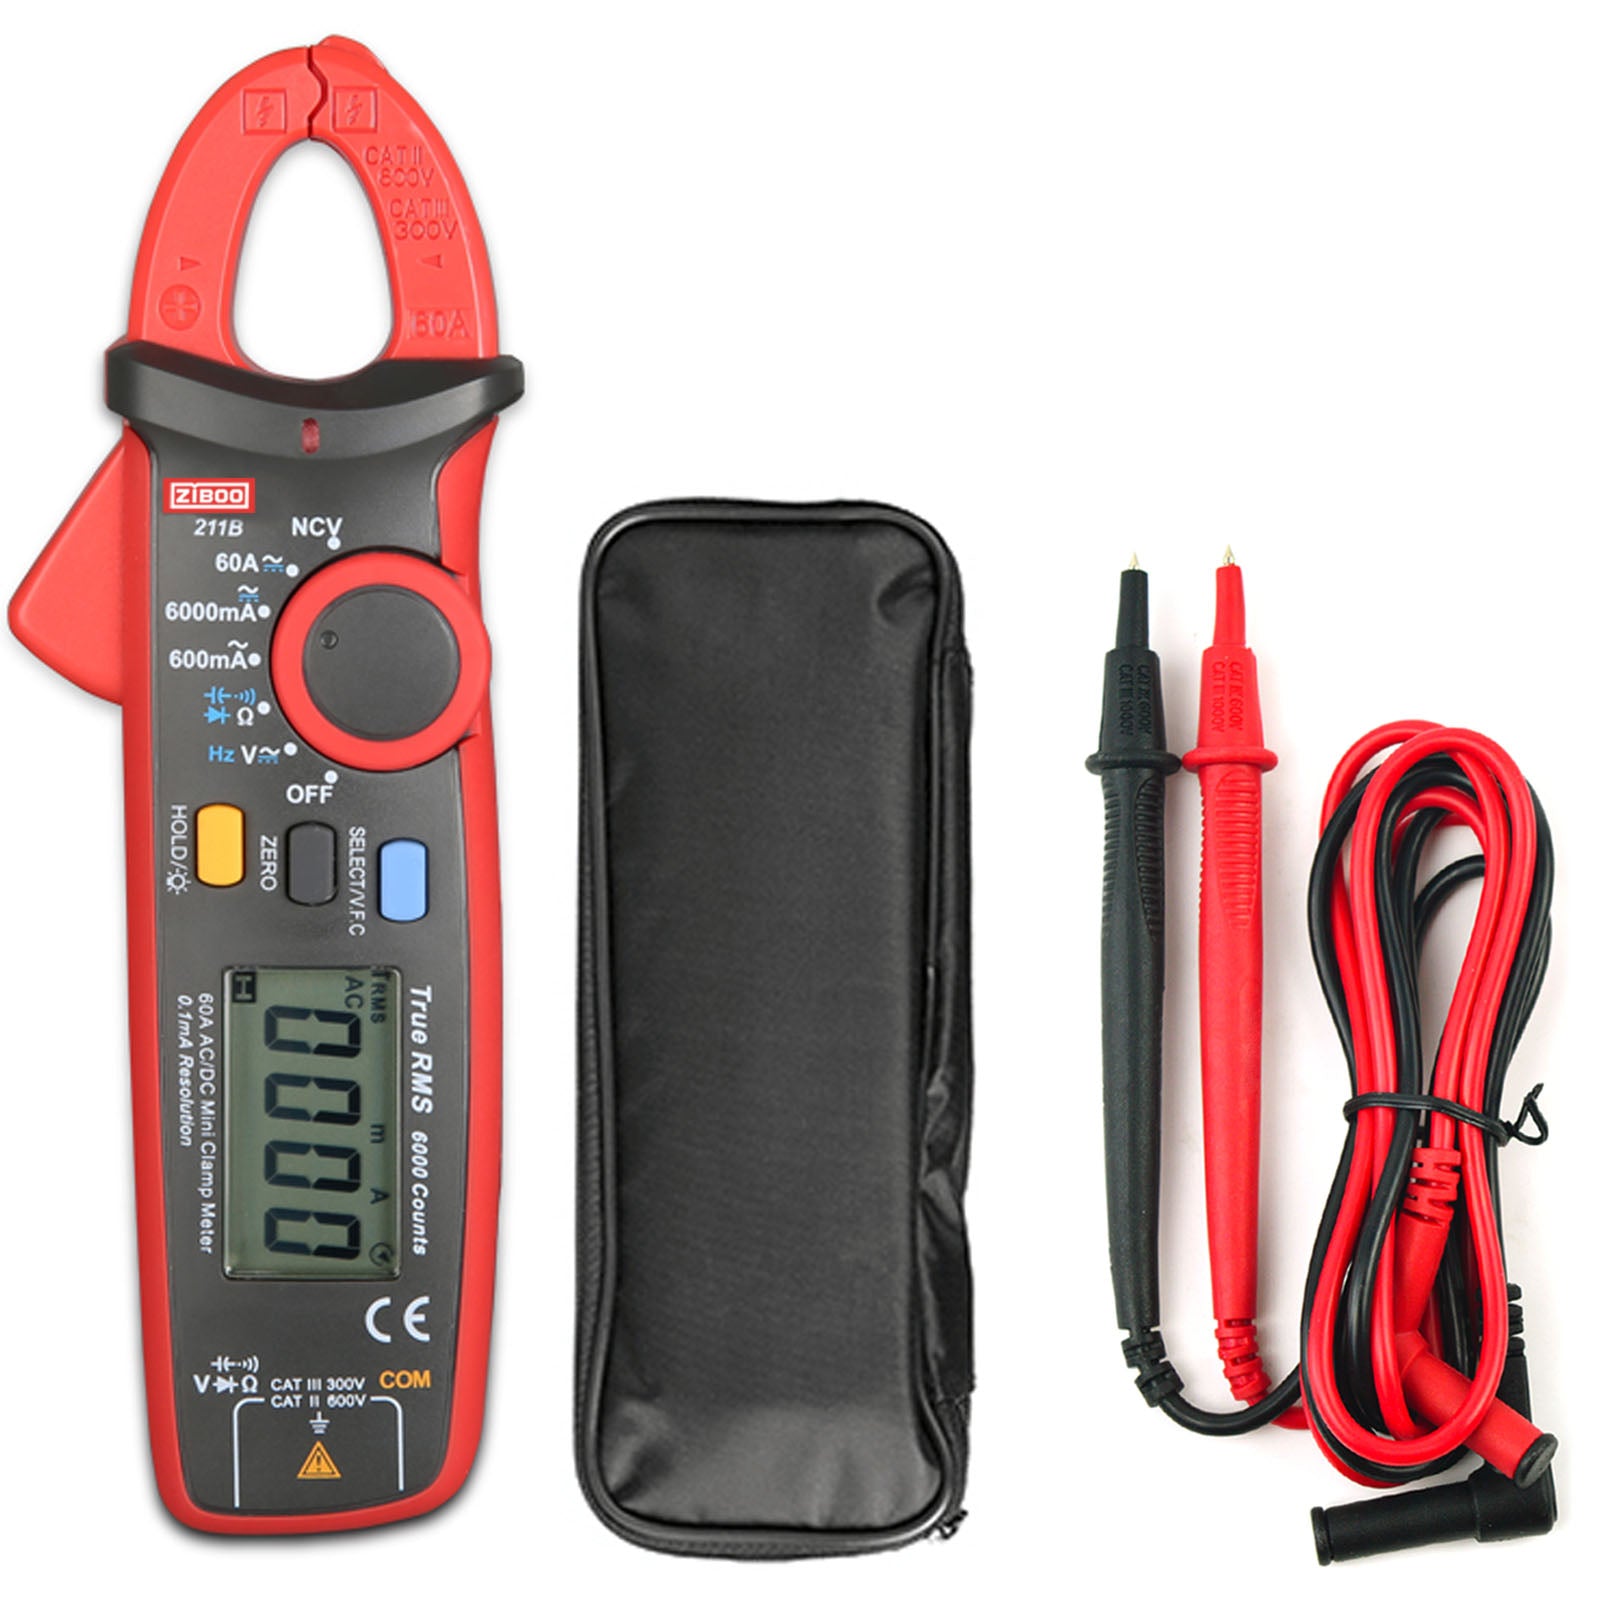 ZIBOO 211B 60A mini clamp meter is a high precision tool designed with the resolution of 0.1mA.